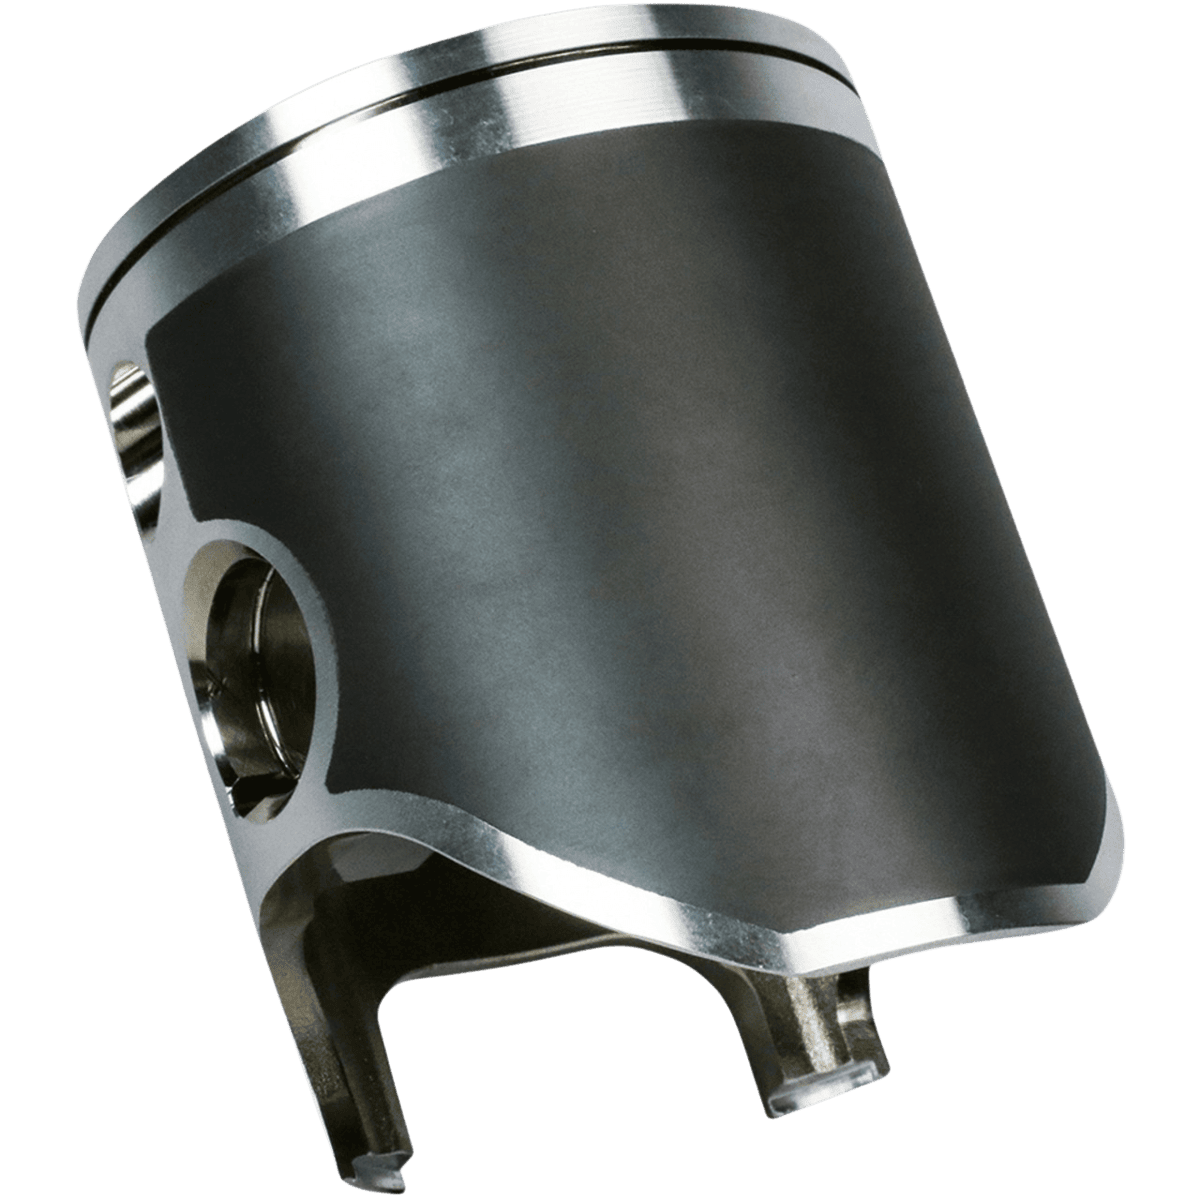 Best 1987 WR430 Piston Kit for Two strokes